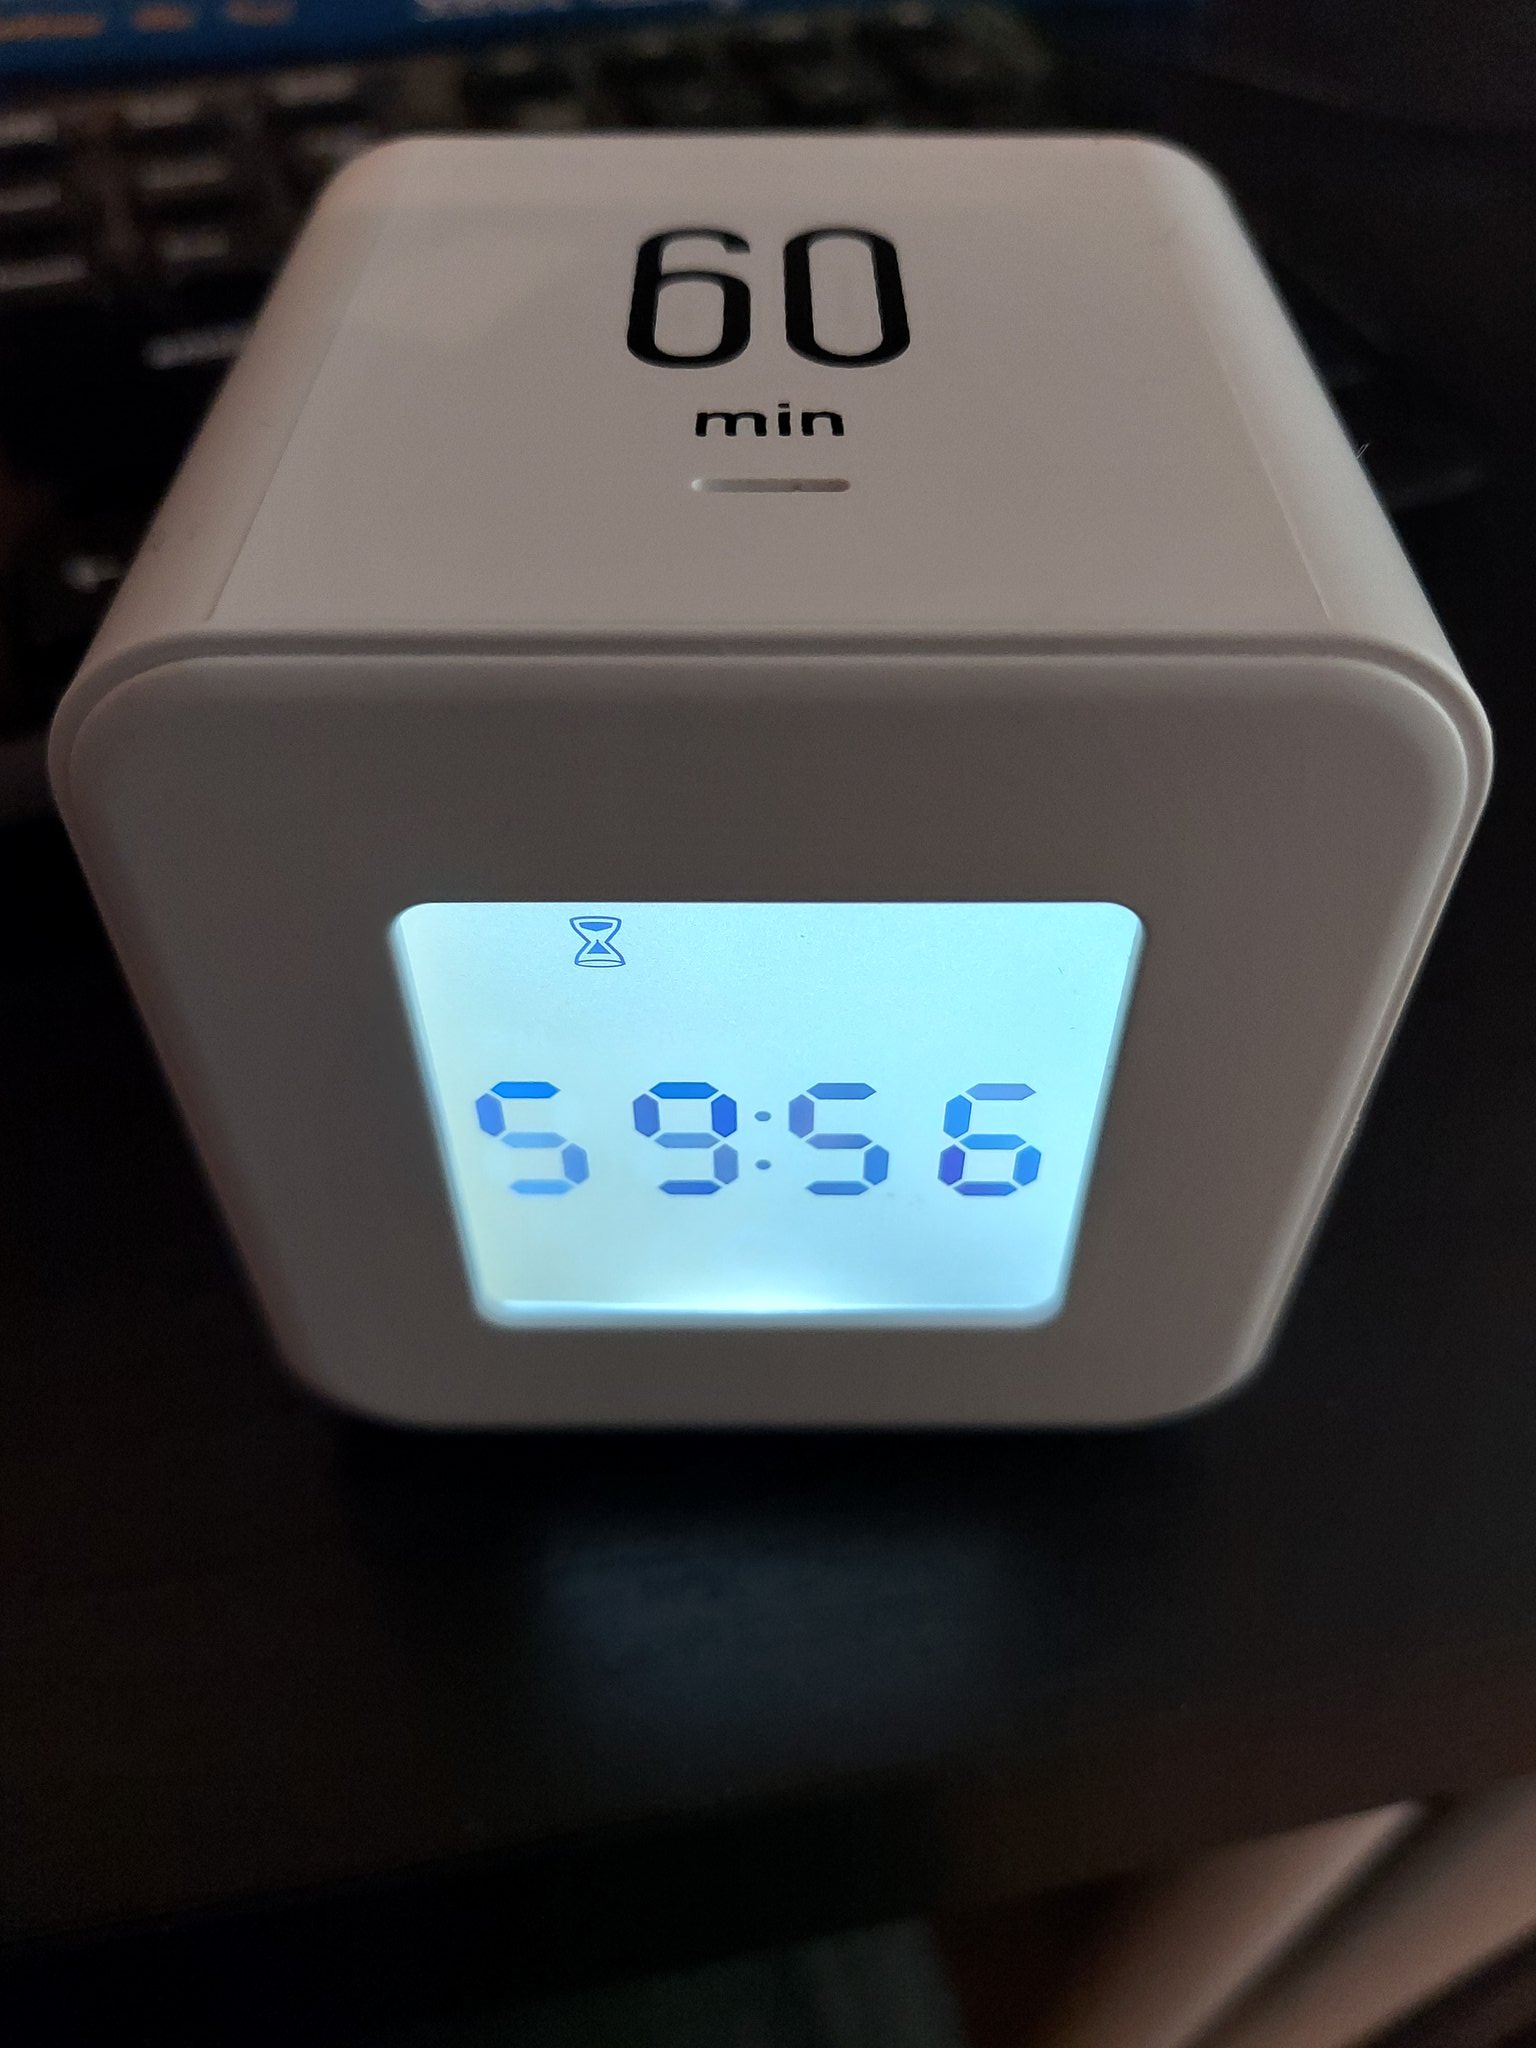 White cube clock/timer with 60 min on the cube top and 59:56 displayed on the clock face.